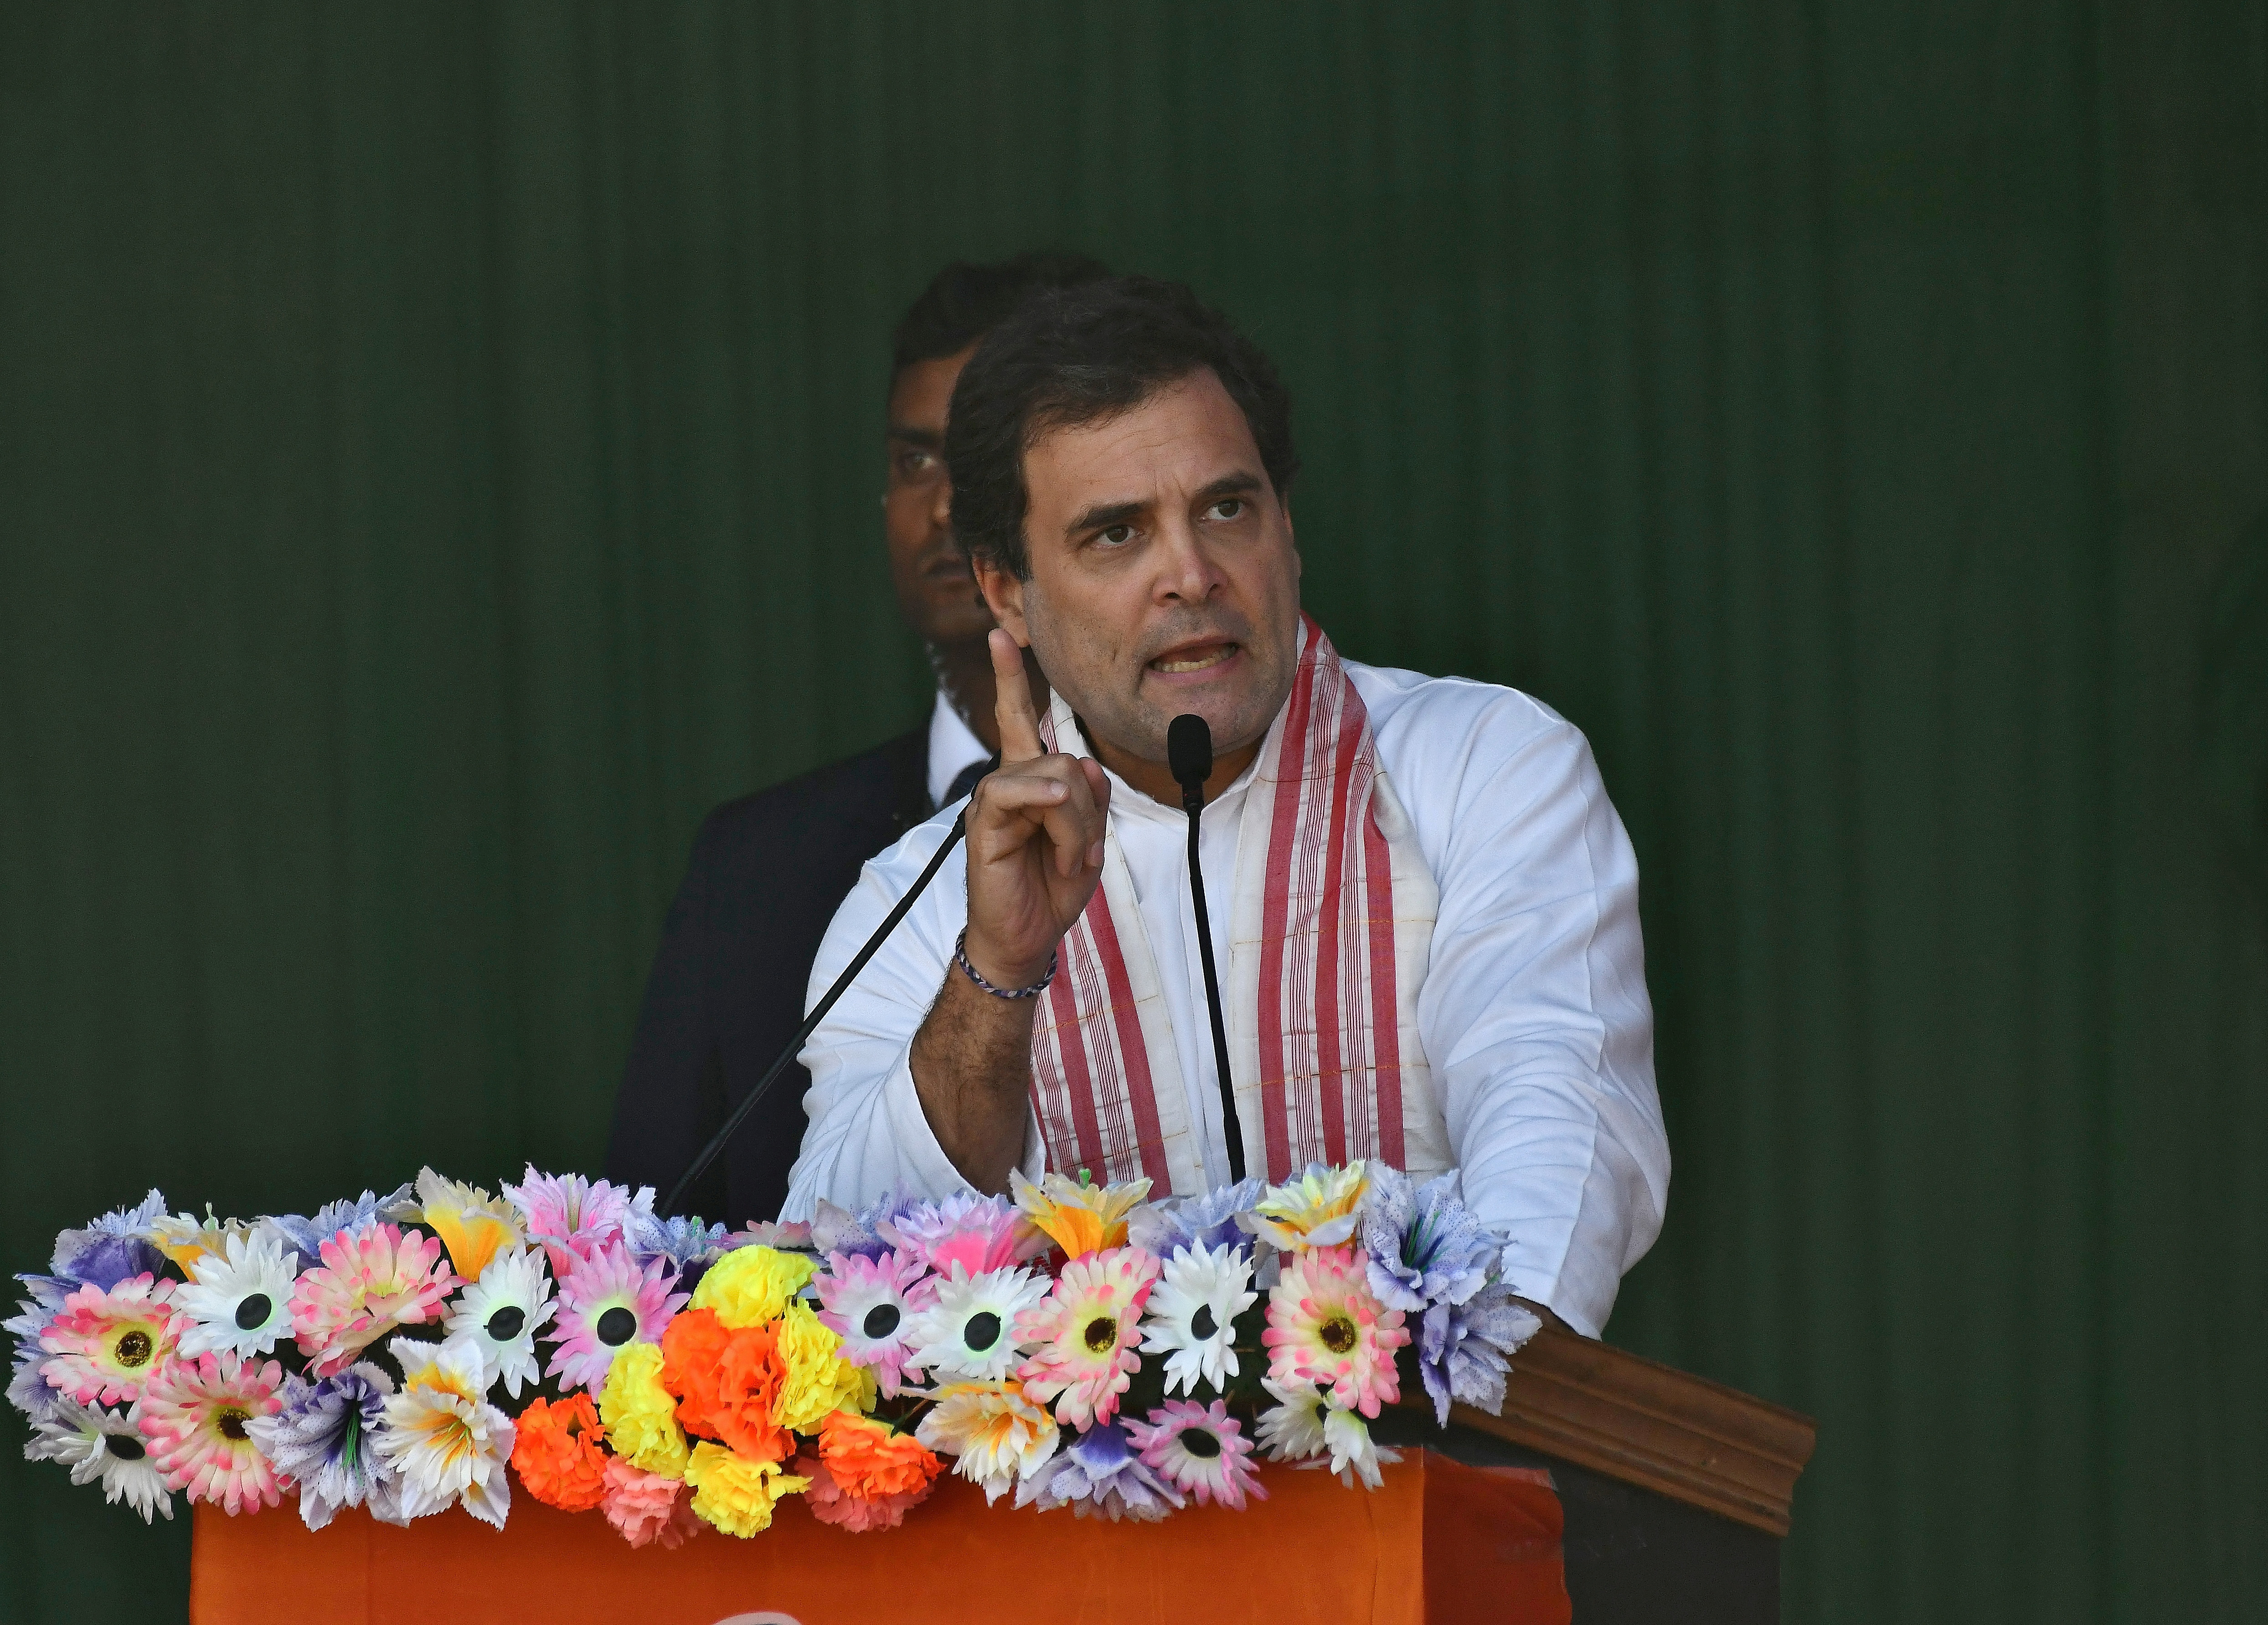 Rahul Gandhi, leader of India's main opposition Congress party, speaks as he attends a protest rally against a new citizenship law, in Guwahati